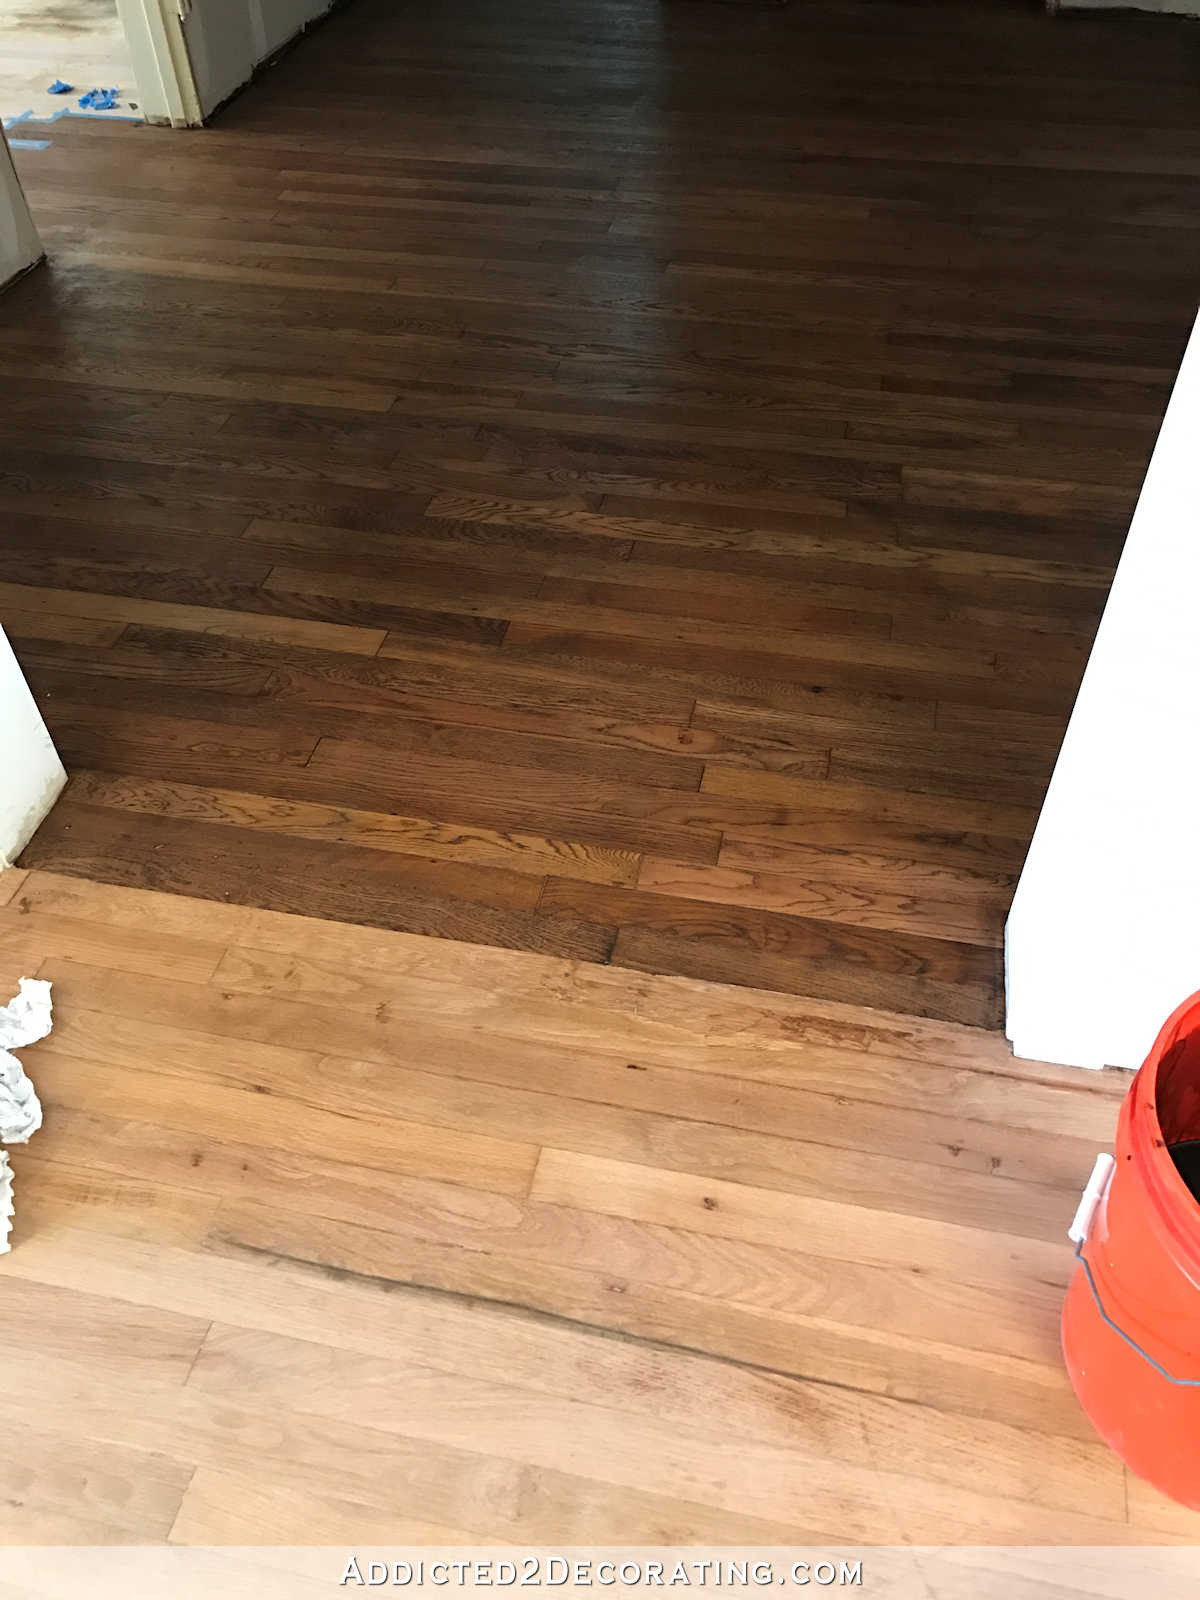 13 Great How to Refinish Hardwood Floors with Pet Stains 2024 free download how to refinish hardwood floors with pet stains of adventures in staining my red oak hardwood floors products process with staining red oak hardwood floors 2 tape off one section at a time f